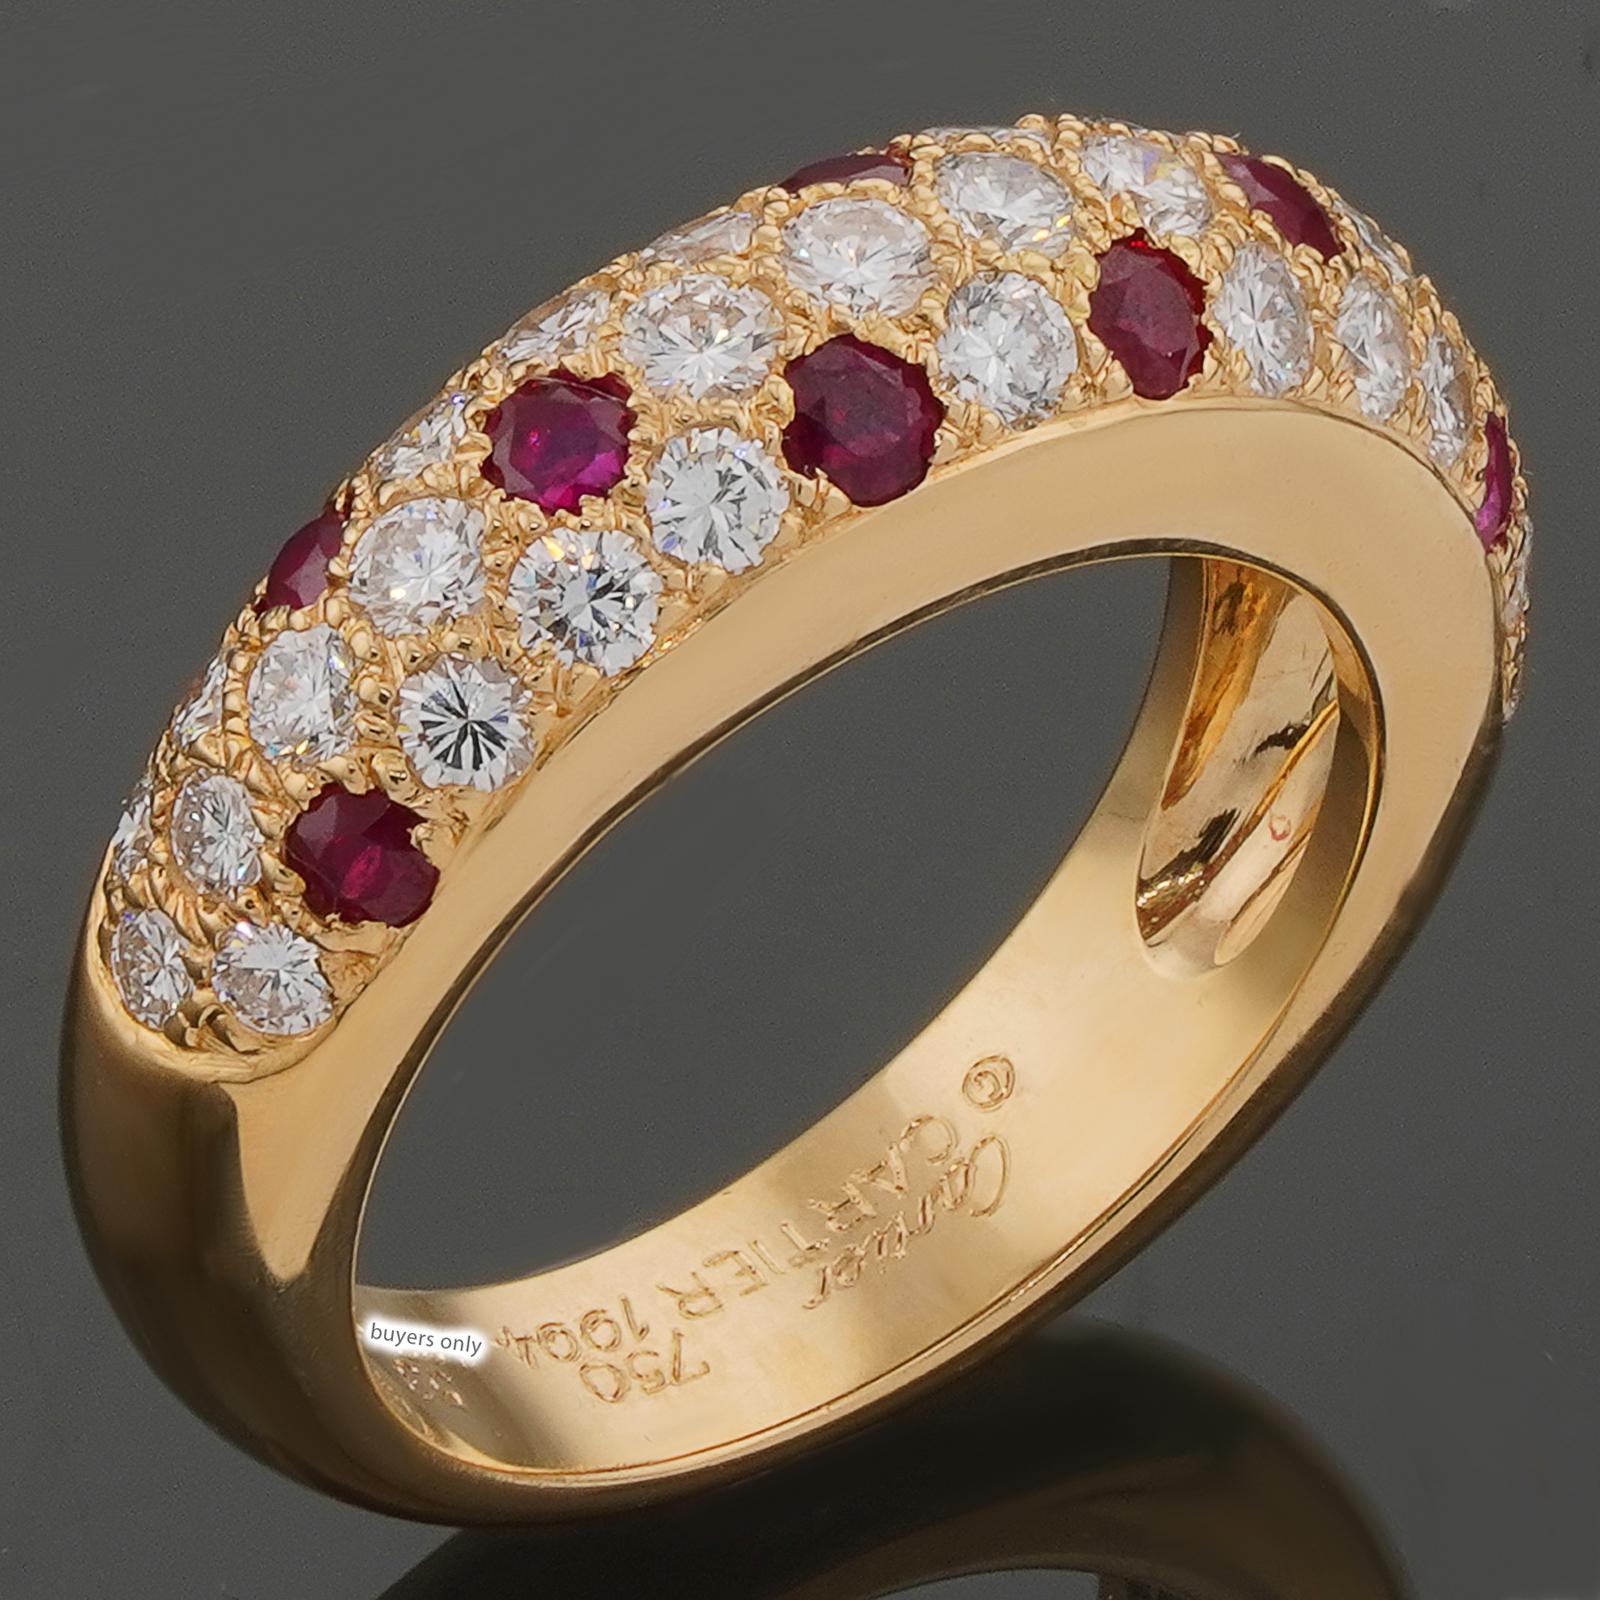 This classic authentic Cartier ring is crafted in 18k yellow gold and pave-set with brilliant-cut round E-F-G VVS1-VVS2 diamonds and round red rubies. Made in France circa 1994. Measurements: 0.23